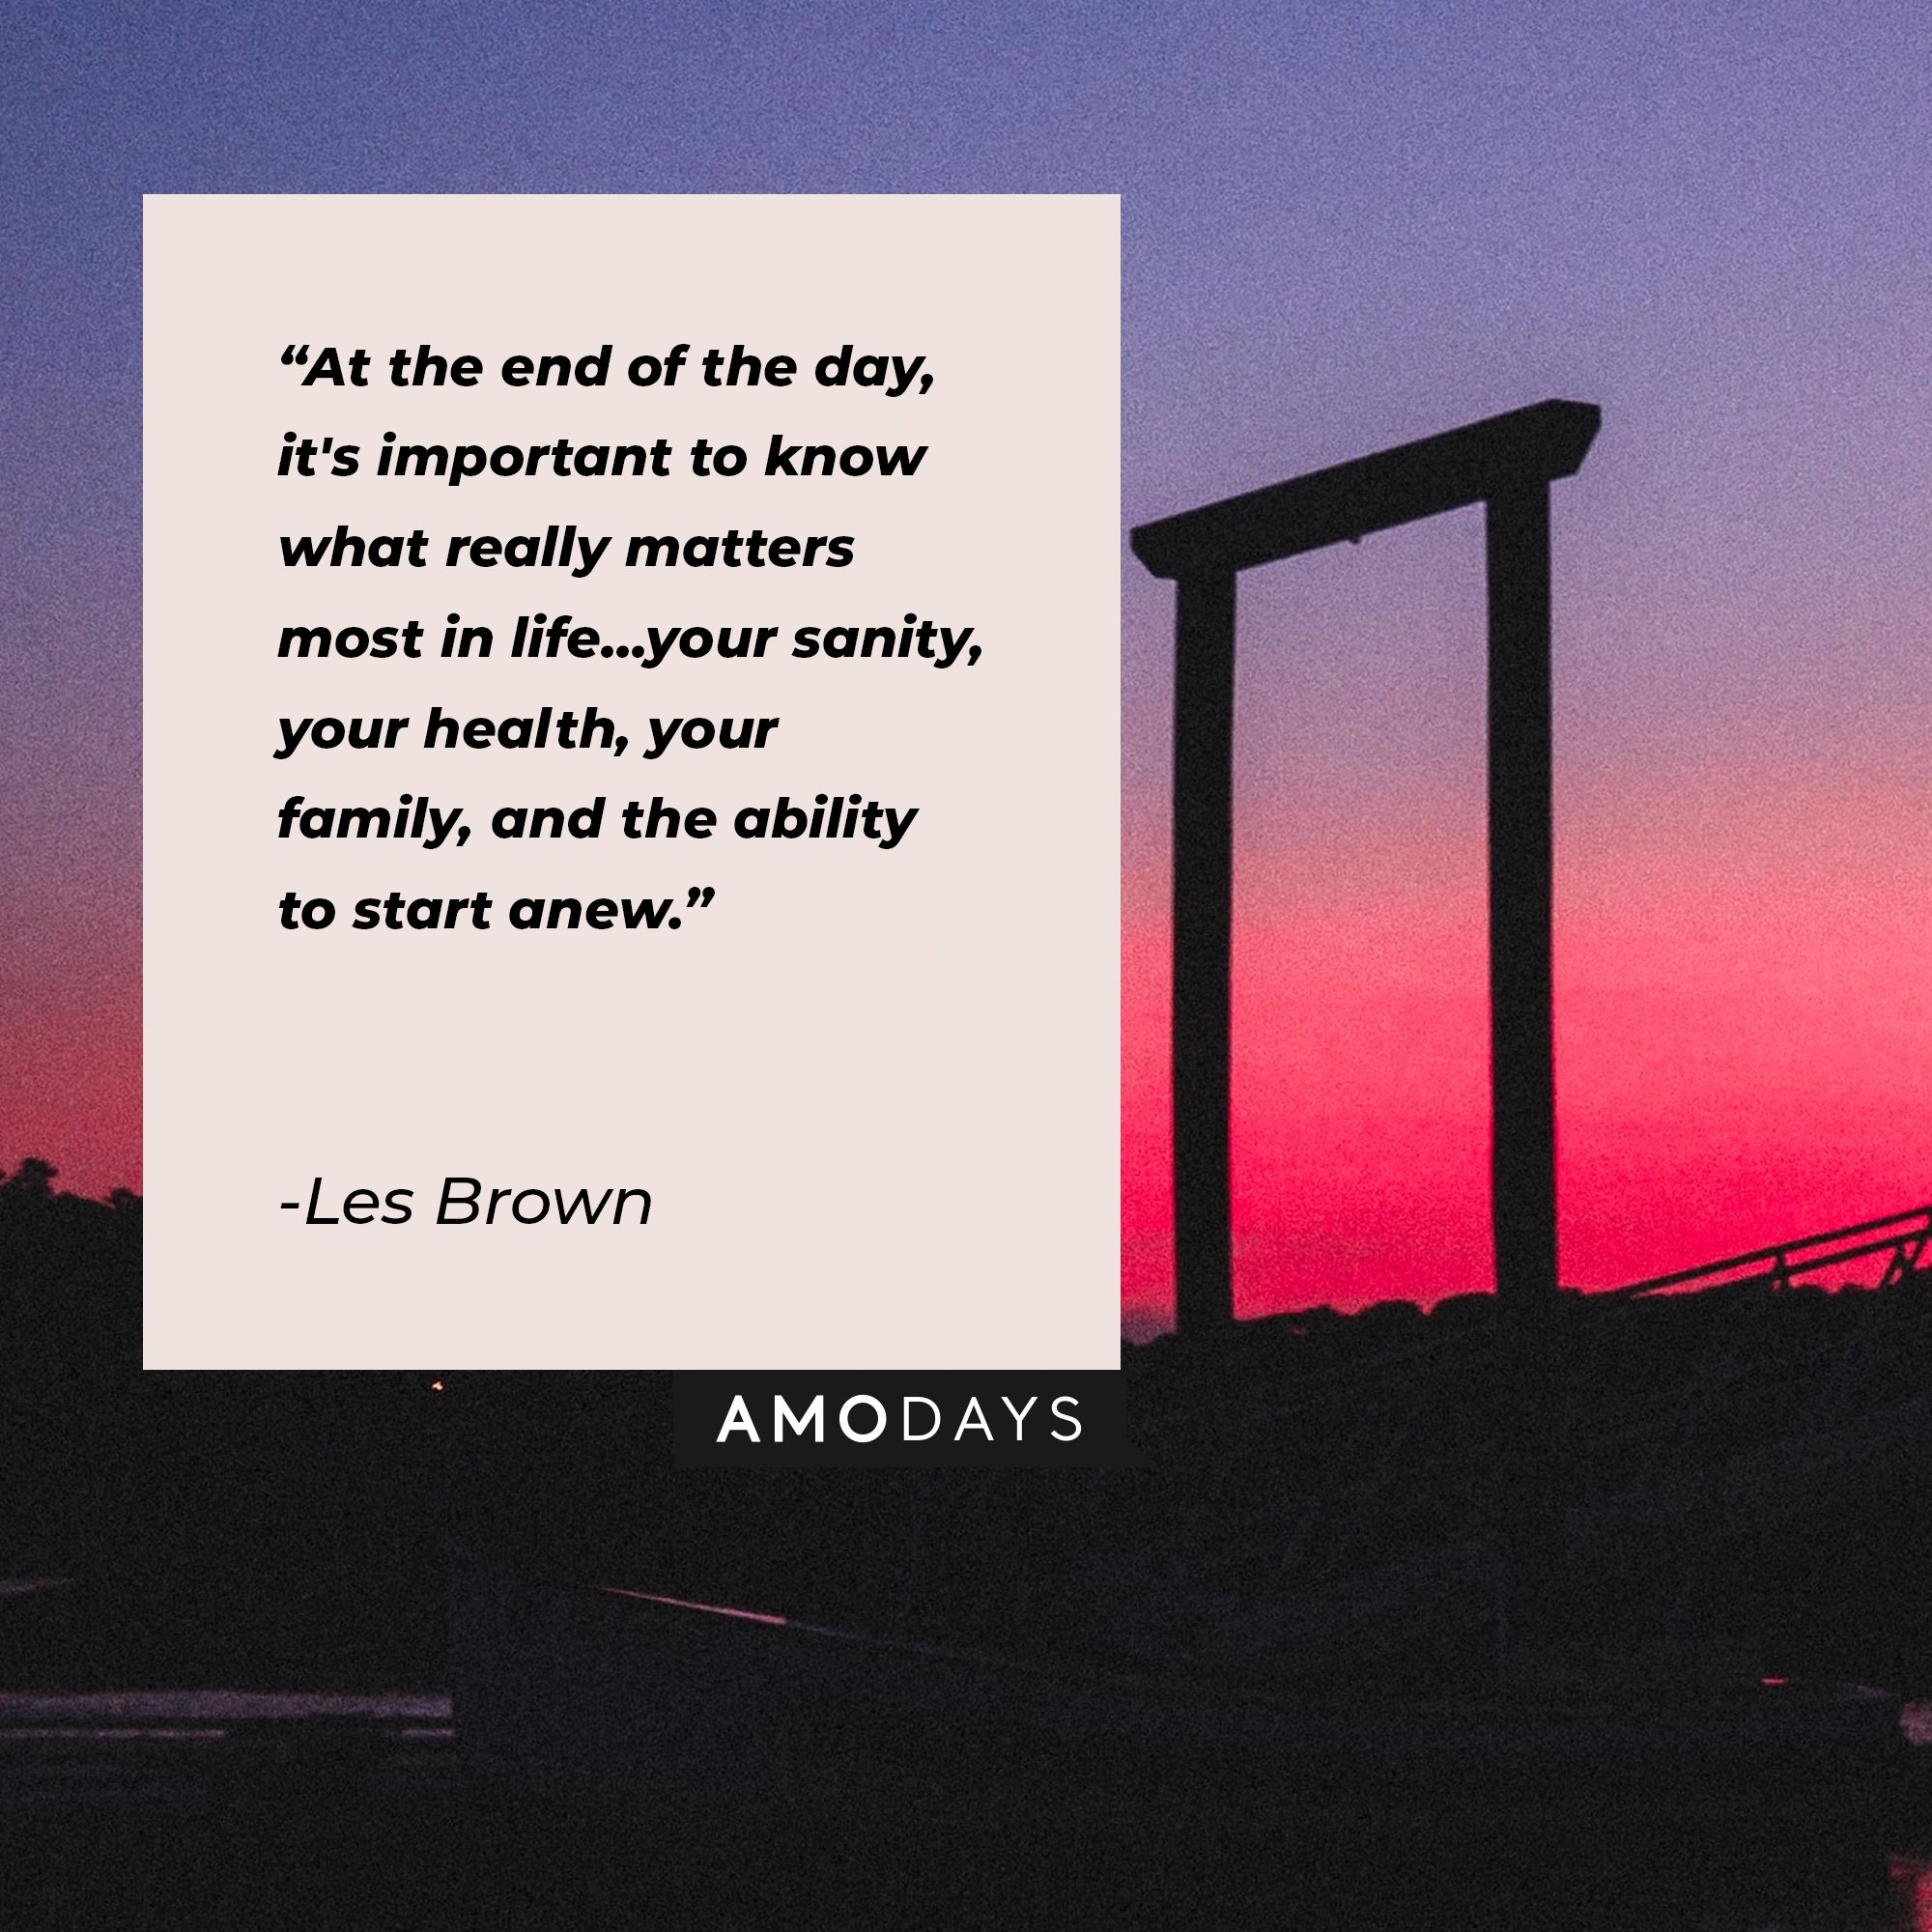 Les Brown’s quote: “At the end of the day, it's important to know what really matters most in life...your sanity, your health, your family, and the ability to start anew.” | Image: AmoDays   